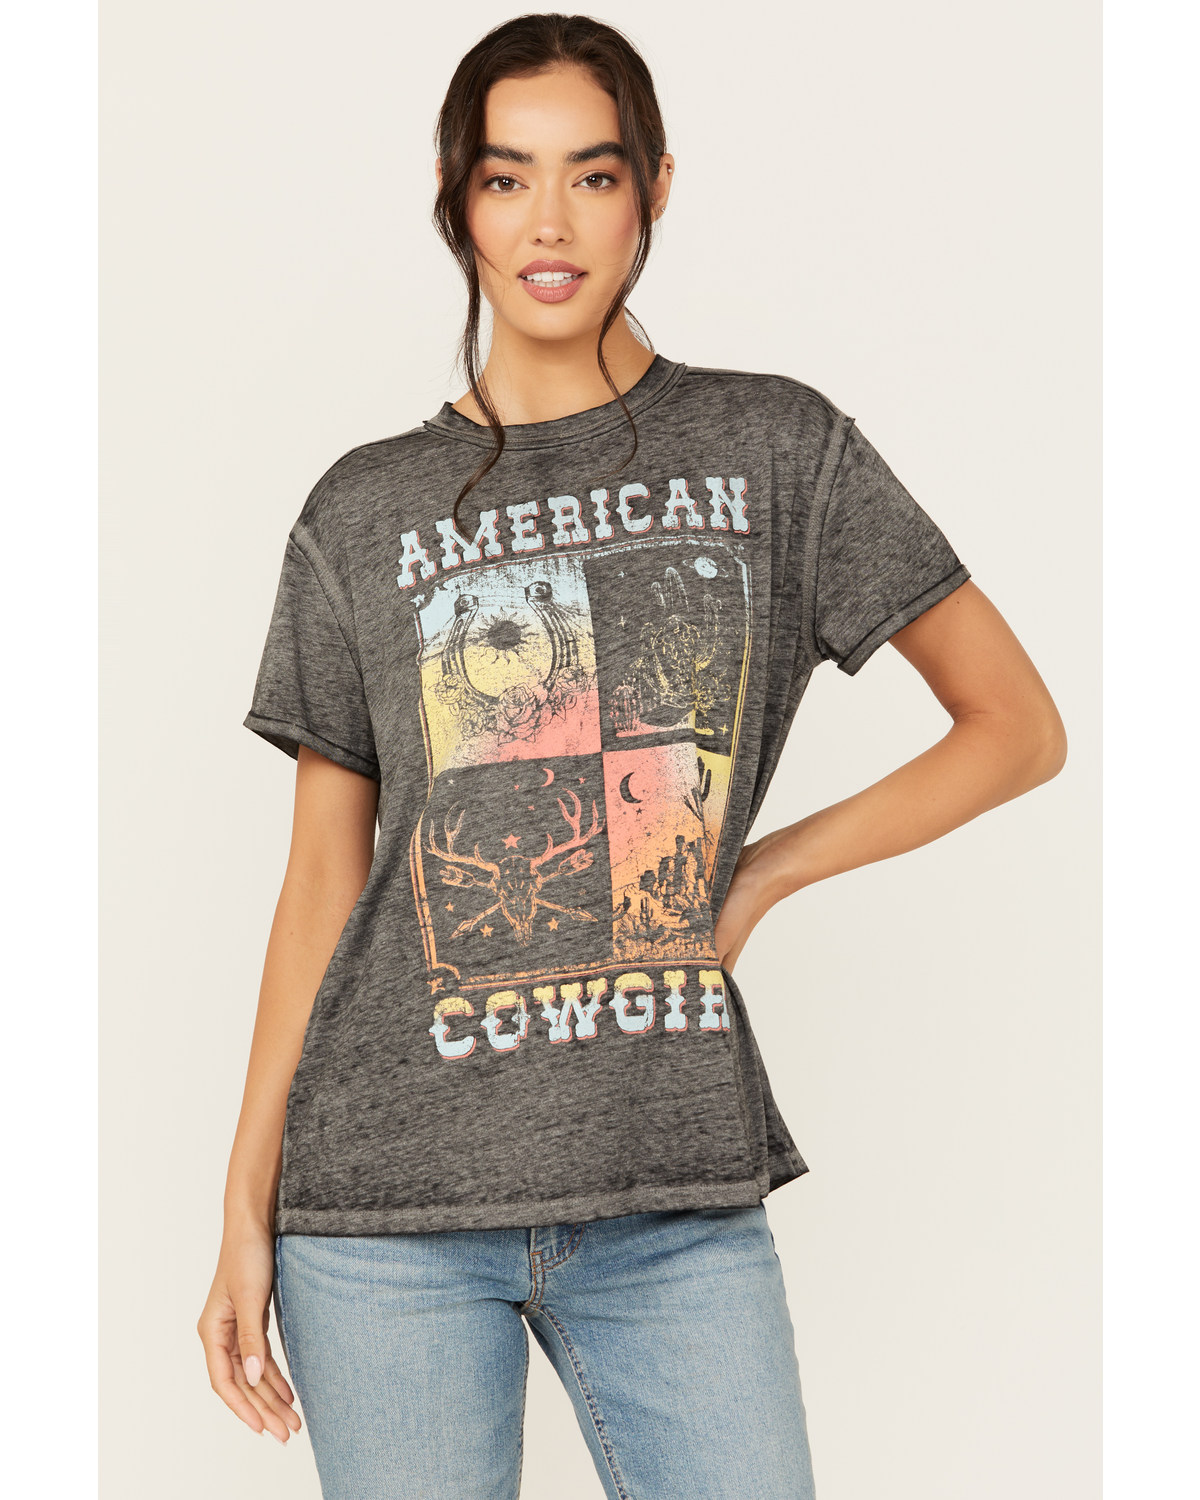 Blended Women's American Cowgirl Short Sleeve Graphic Tee